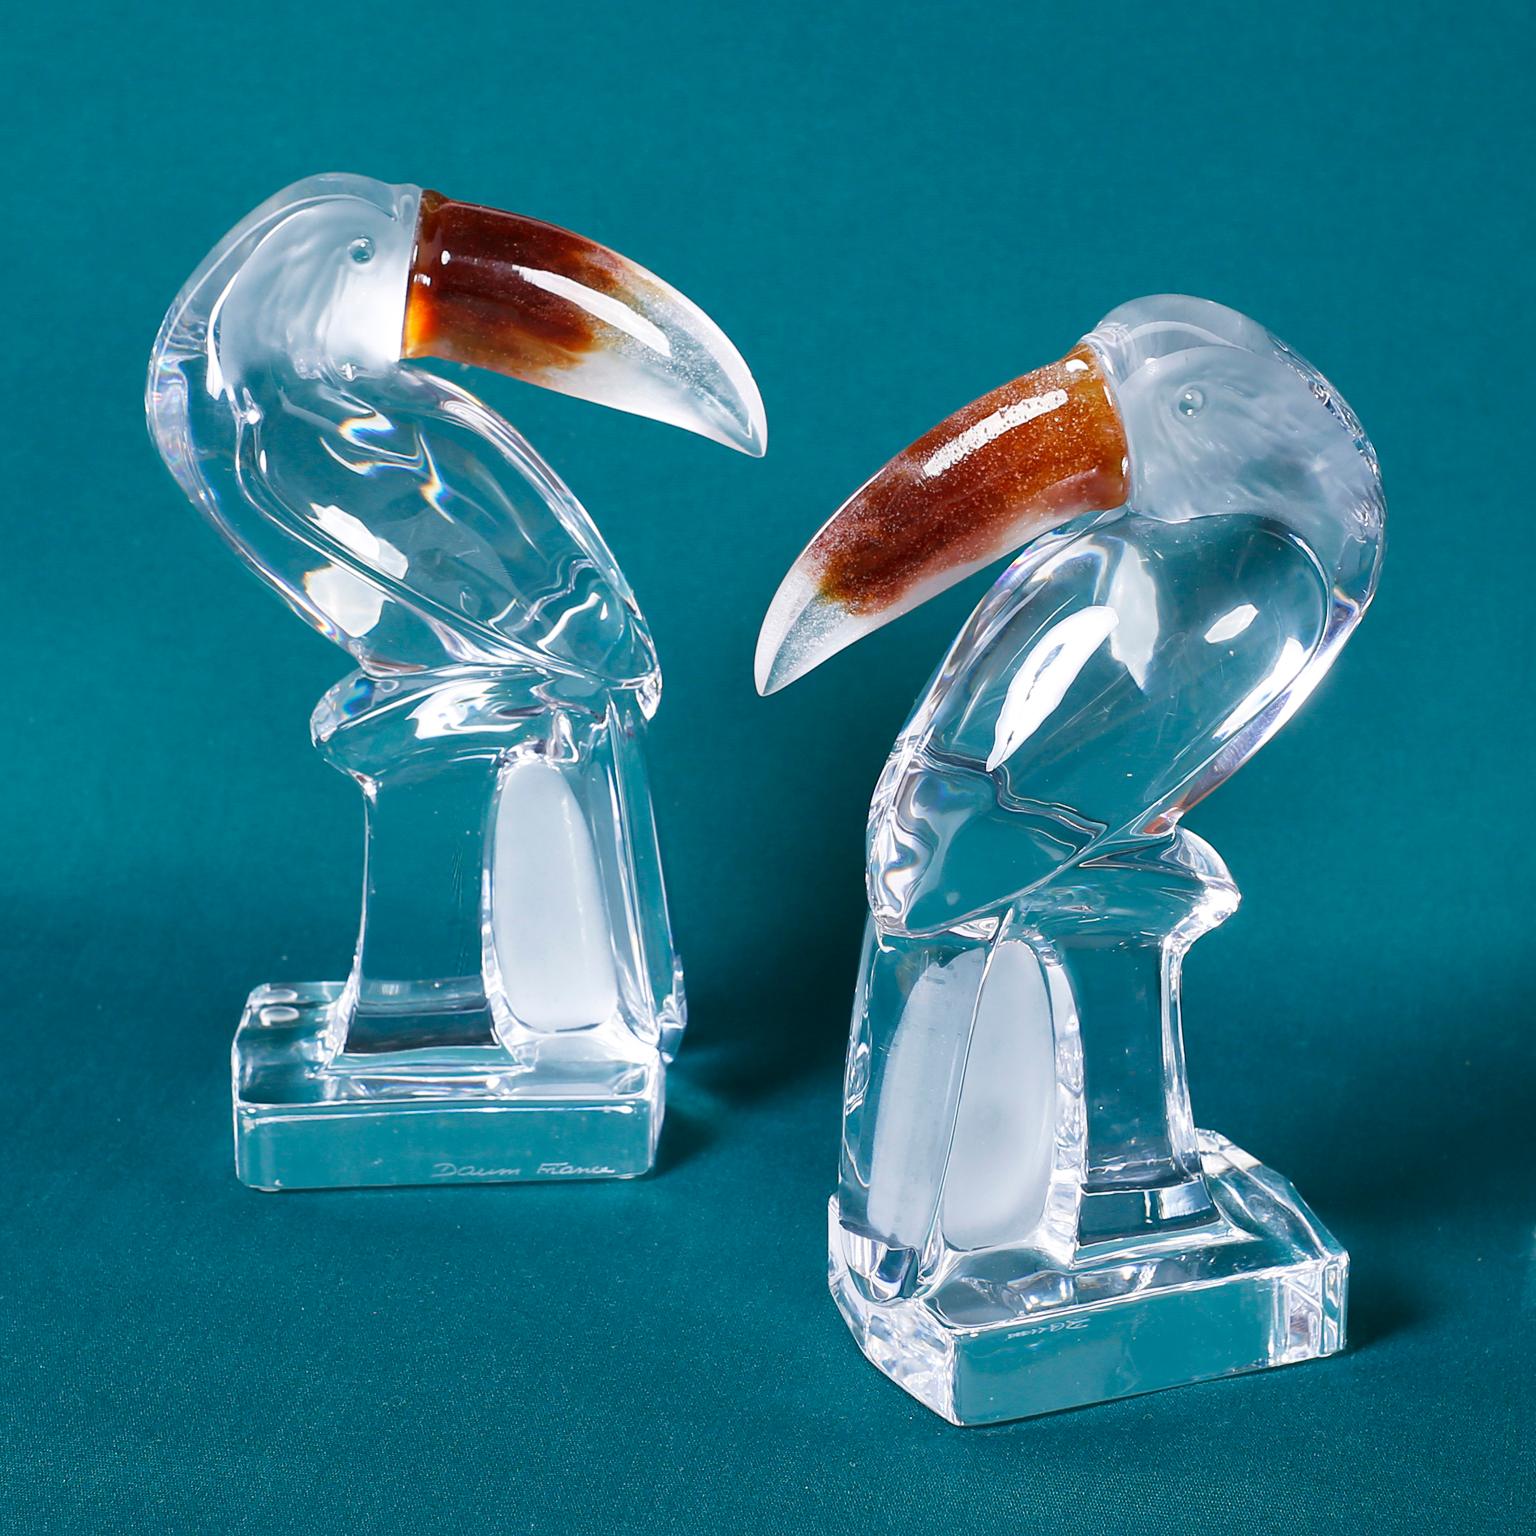 Pair of midcentury stylized glass toucans with frosted faces and amber infused beaks. Signed Daum France on the bases.